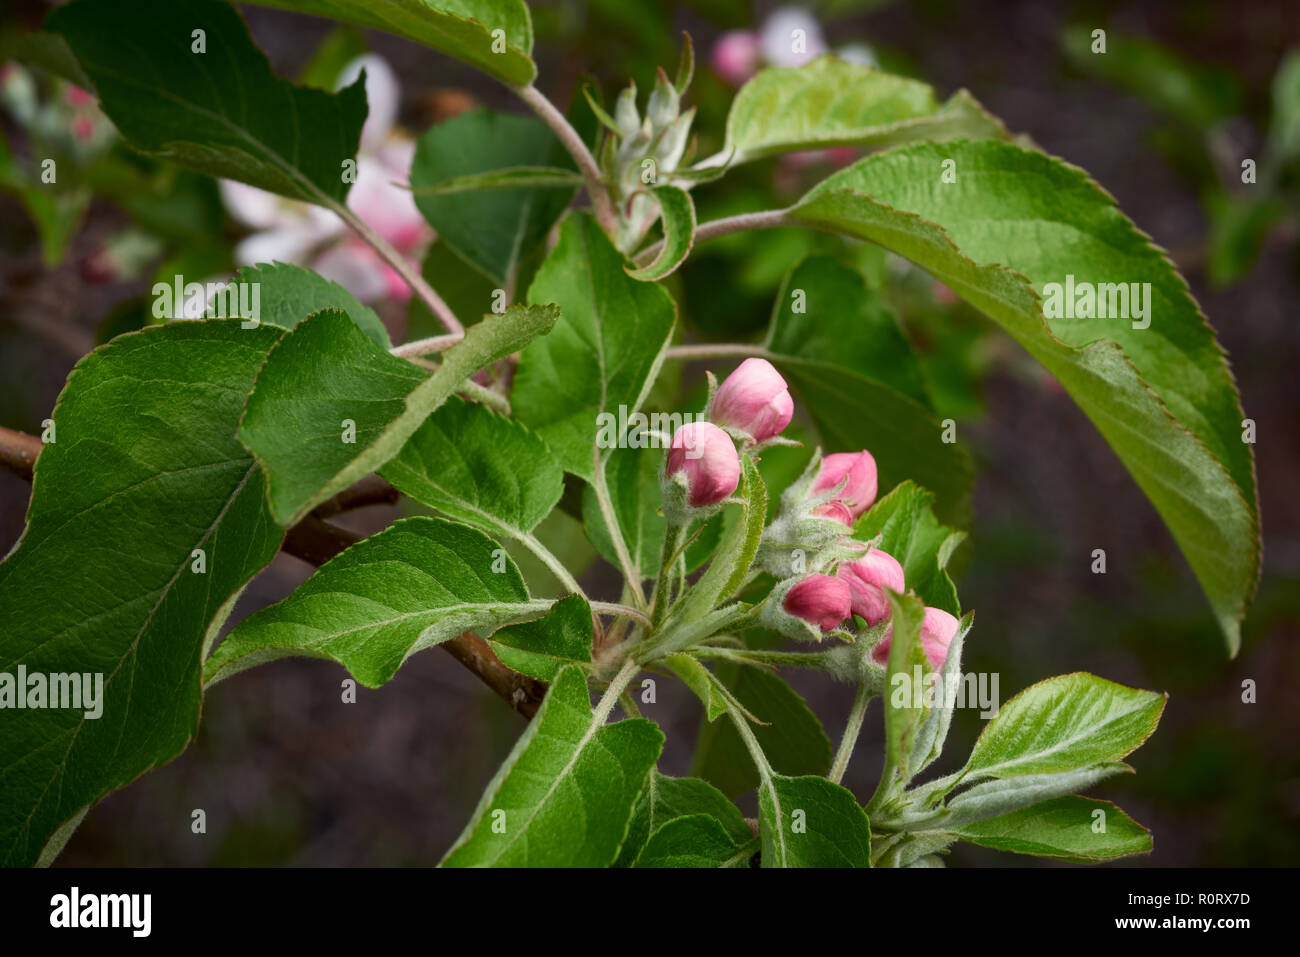 New seasons growth with flower buds emerging. Stock Photo